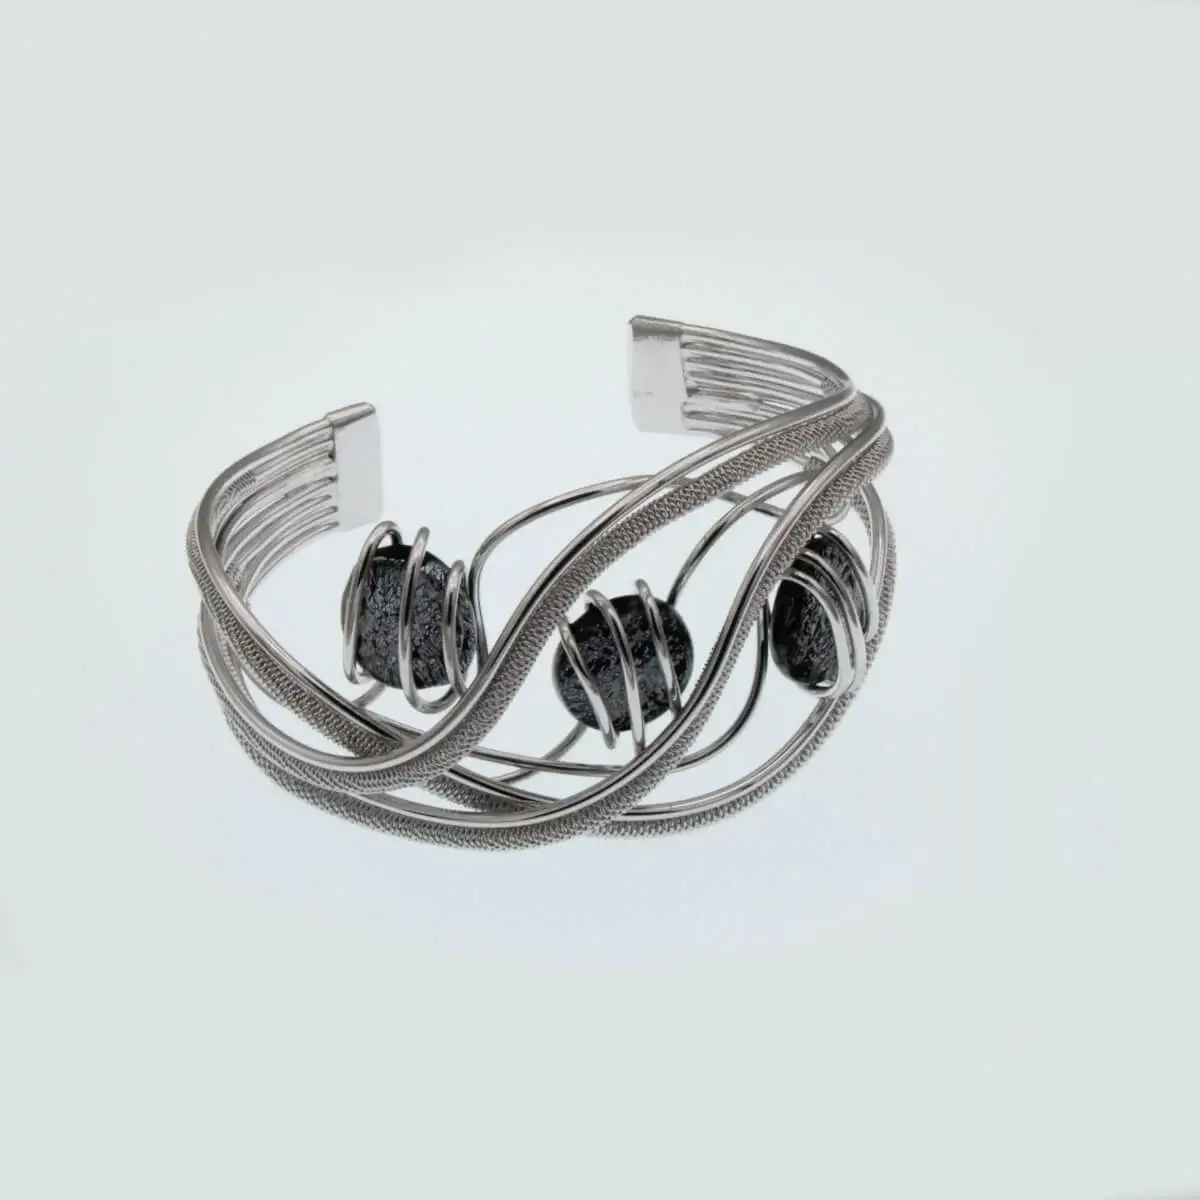 Hand Wrapped rhodium silver wire large cuff bracelet in wave shape with three Murano glass grey beads